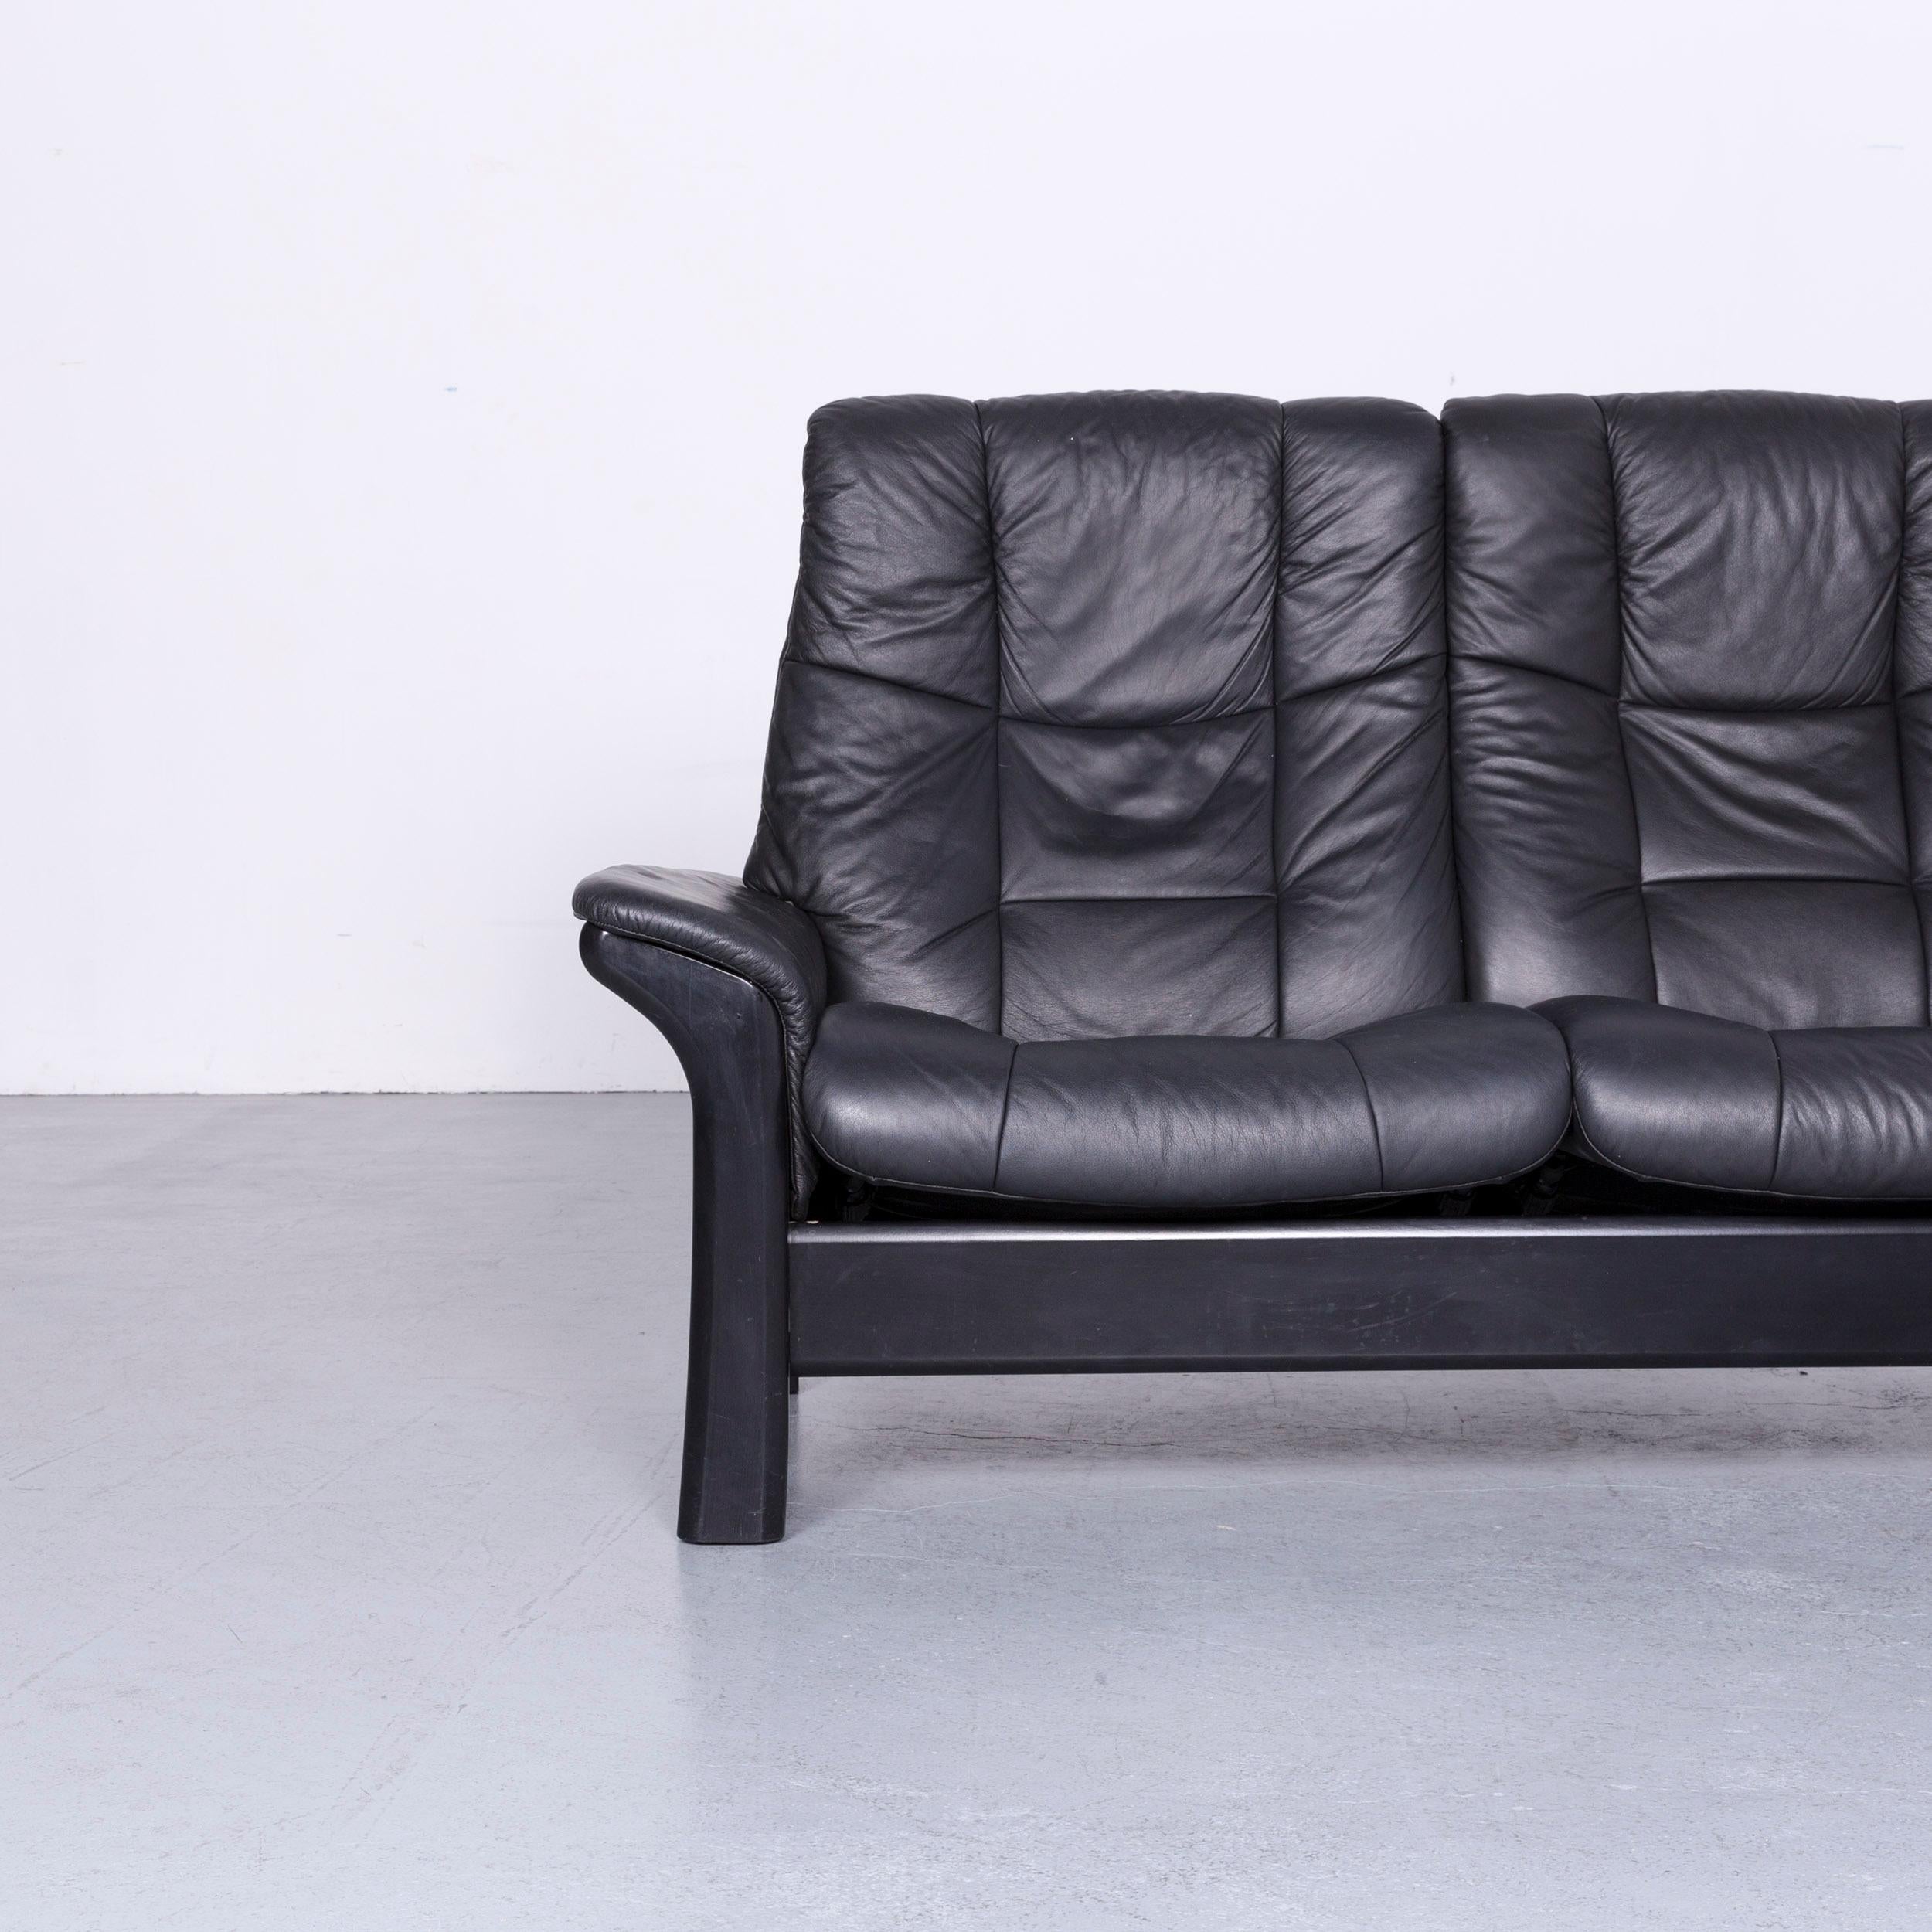 Stressless Buckingham Two-Seat Sofa Black Leather Couch with Function In Good Condition For Sale In Cologne, DE